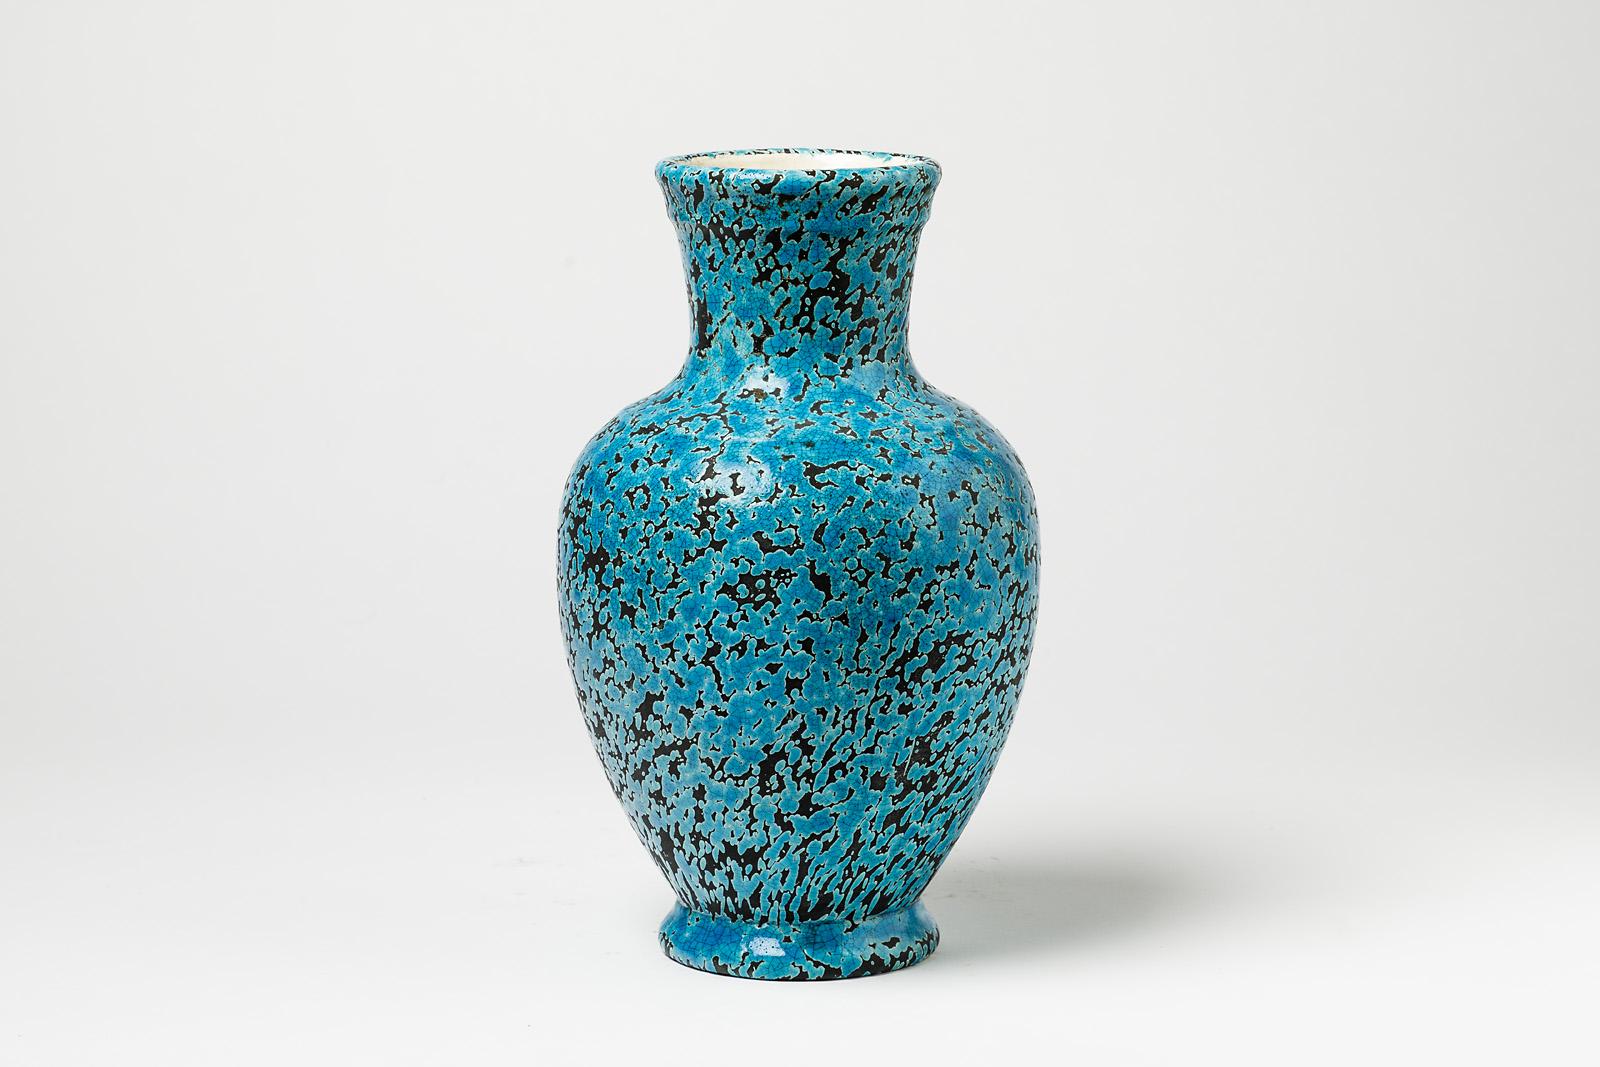 Mid-Century Modern Decorative and Precious Midcentury Ceramic Blue Vase, Dated 1965 For Sale